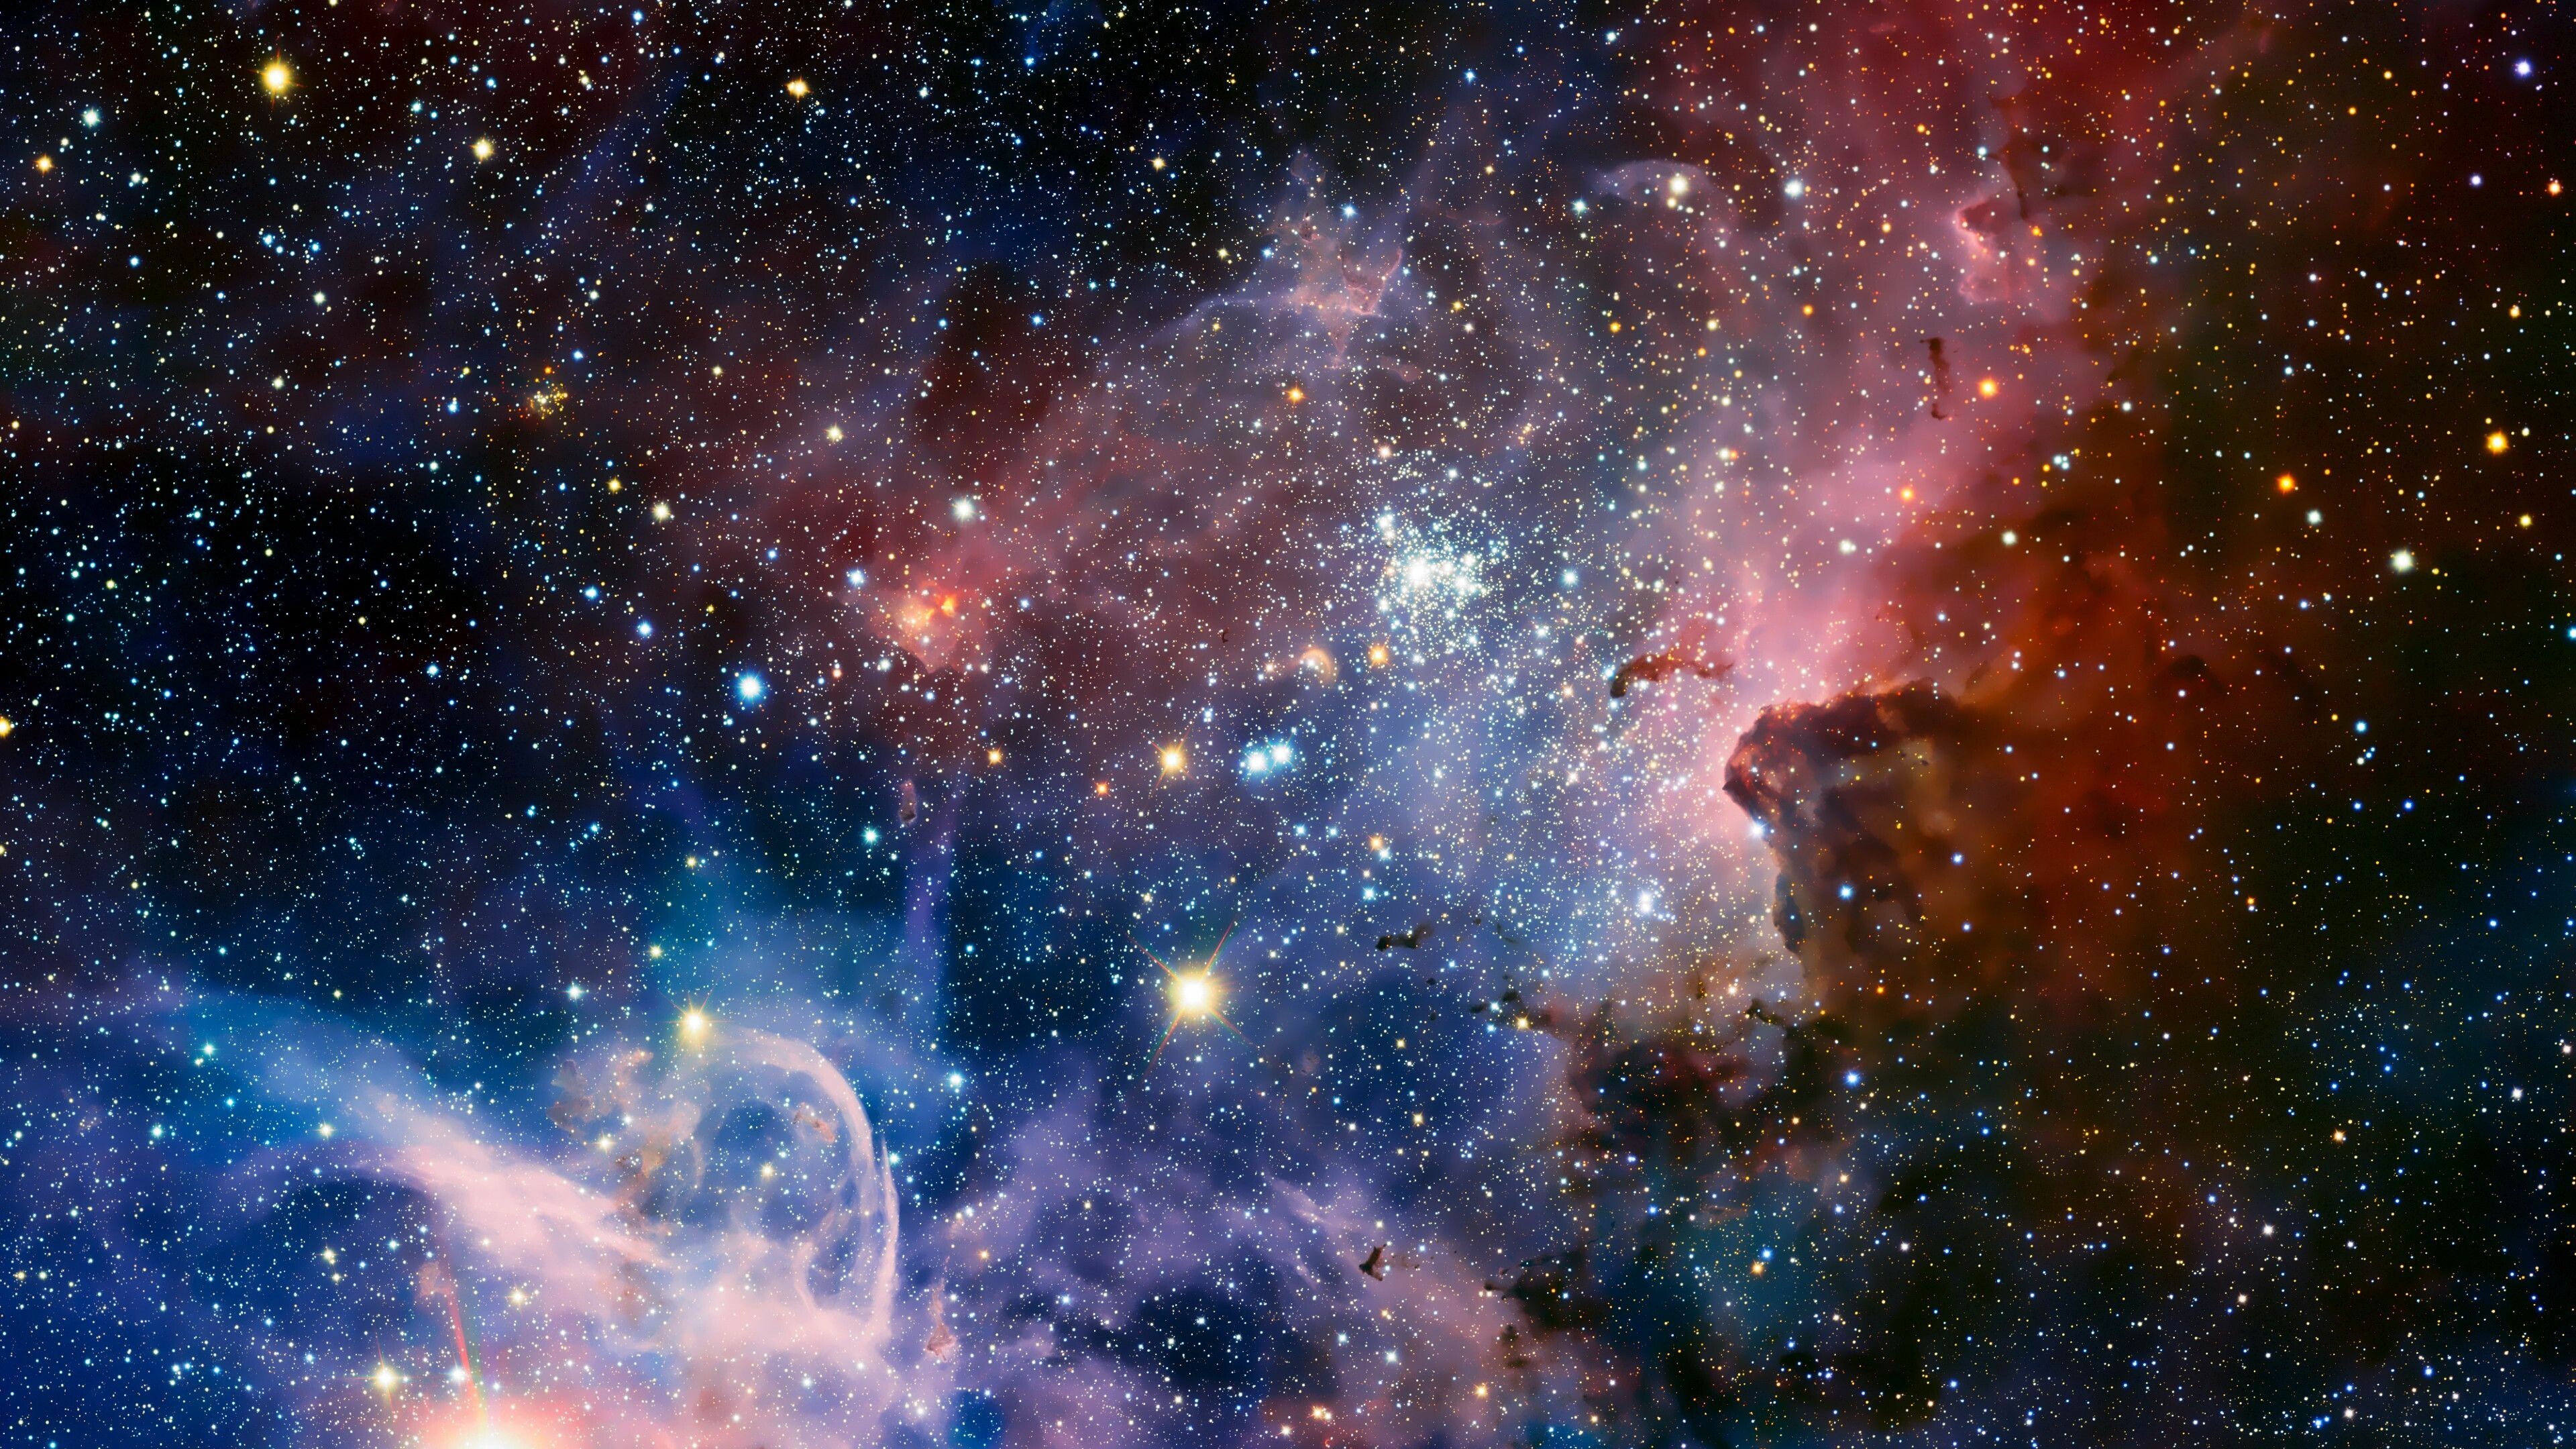 Astronaut in Outer Space Wallpapers | HD Wallpapers | ID #28729